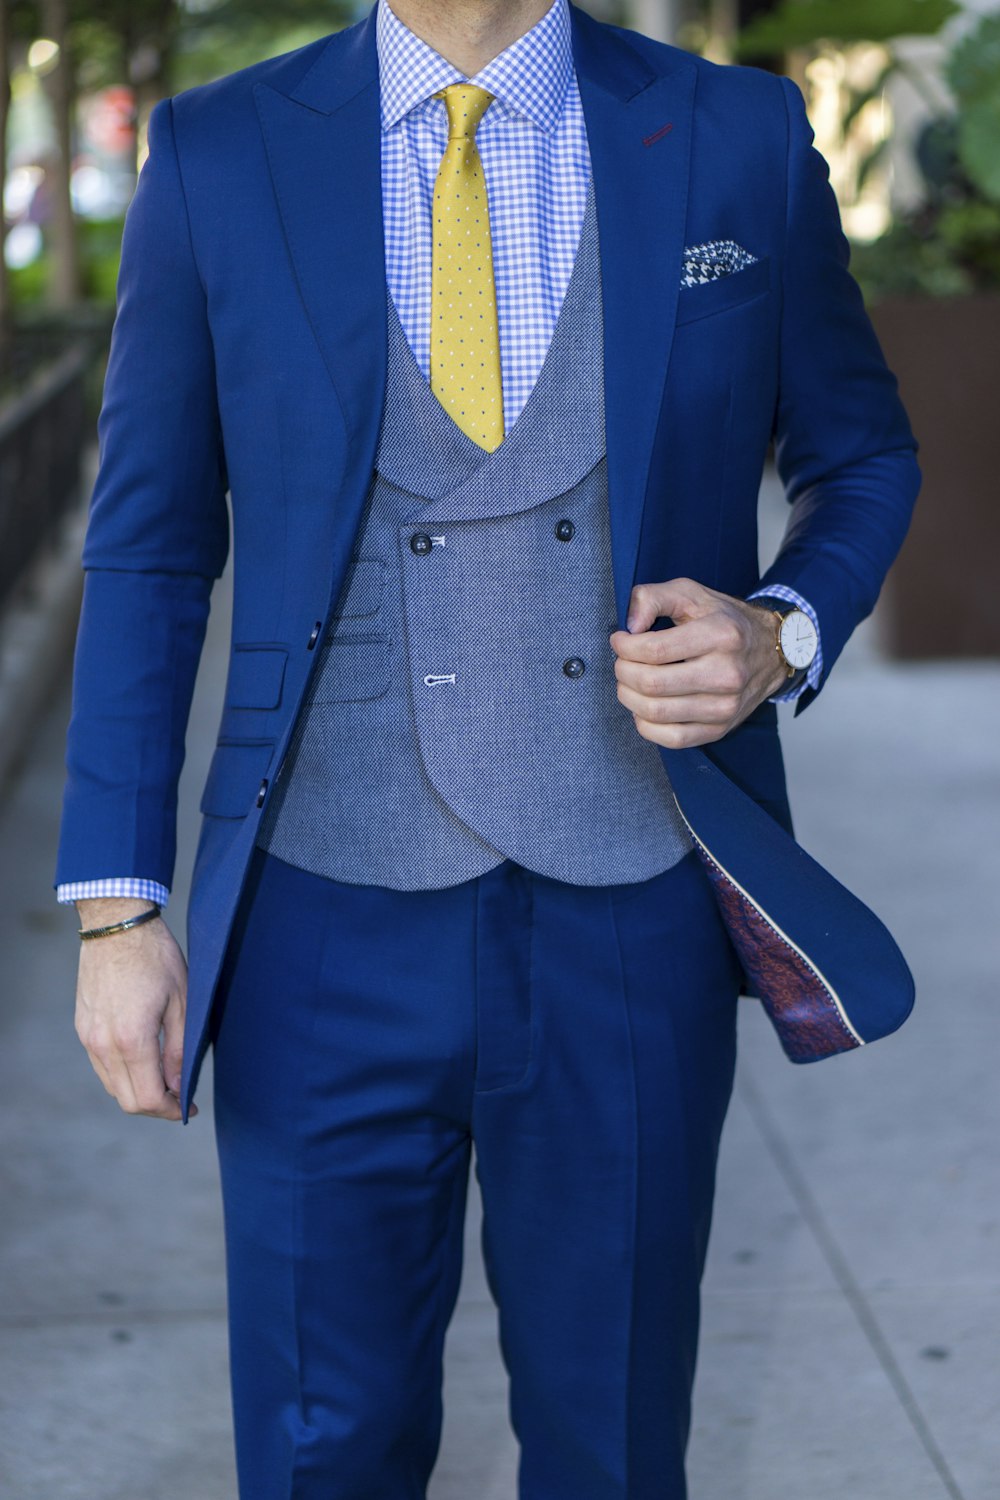 man in blue suit standing on road during daytime